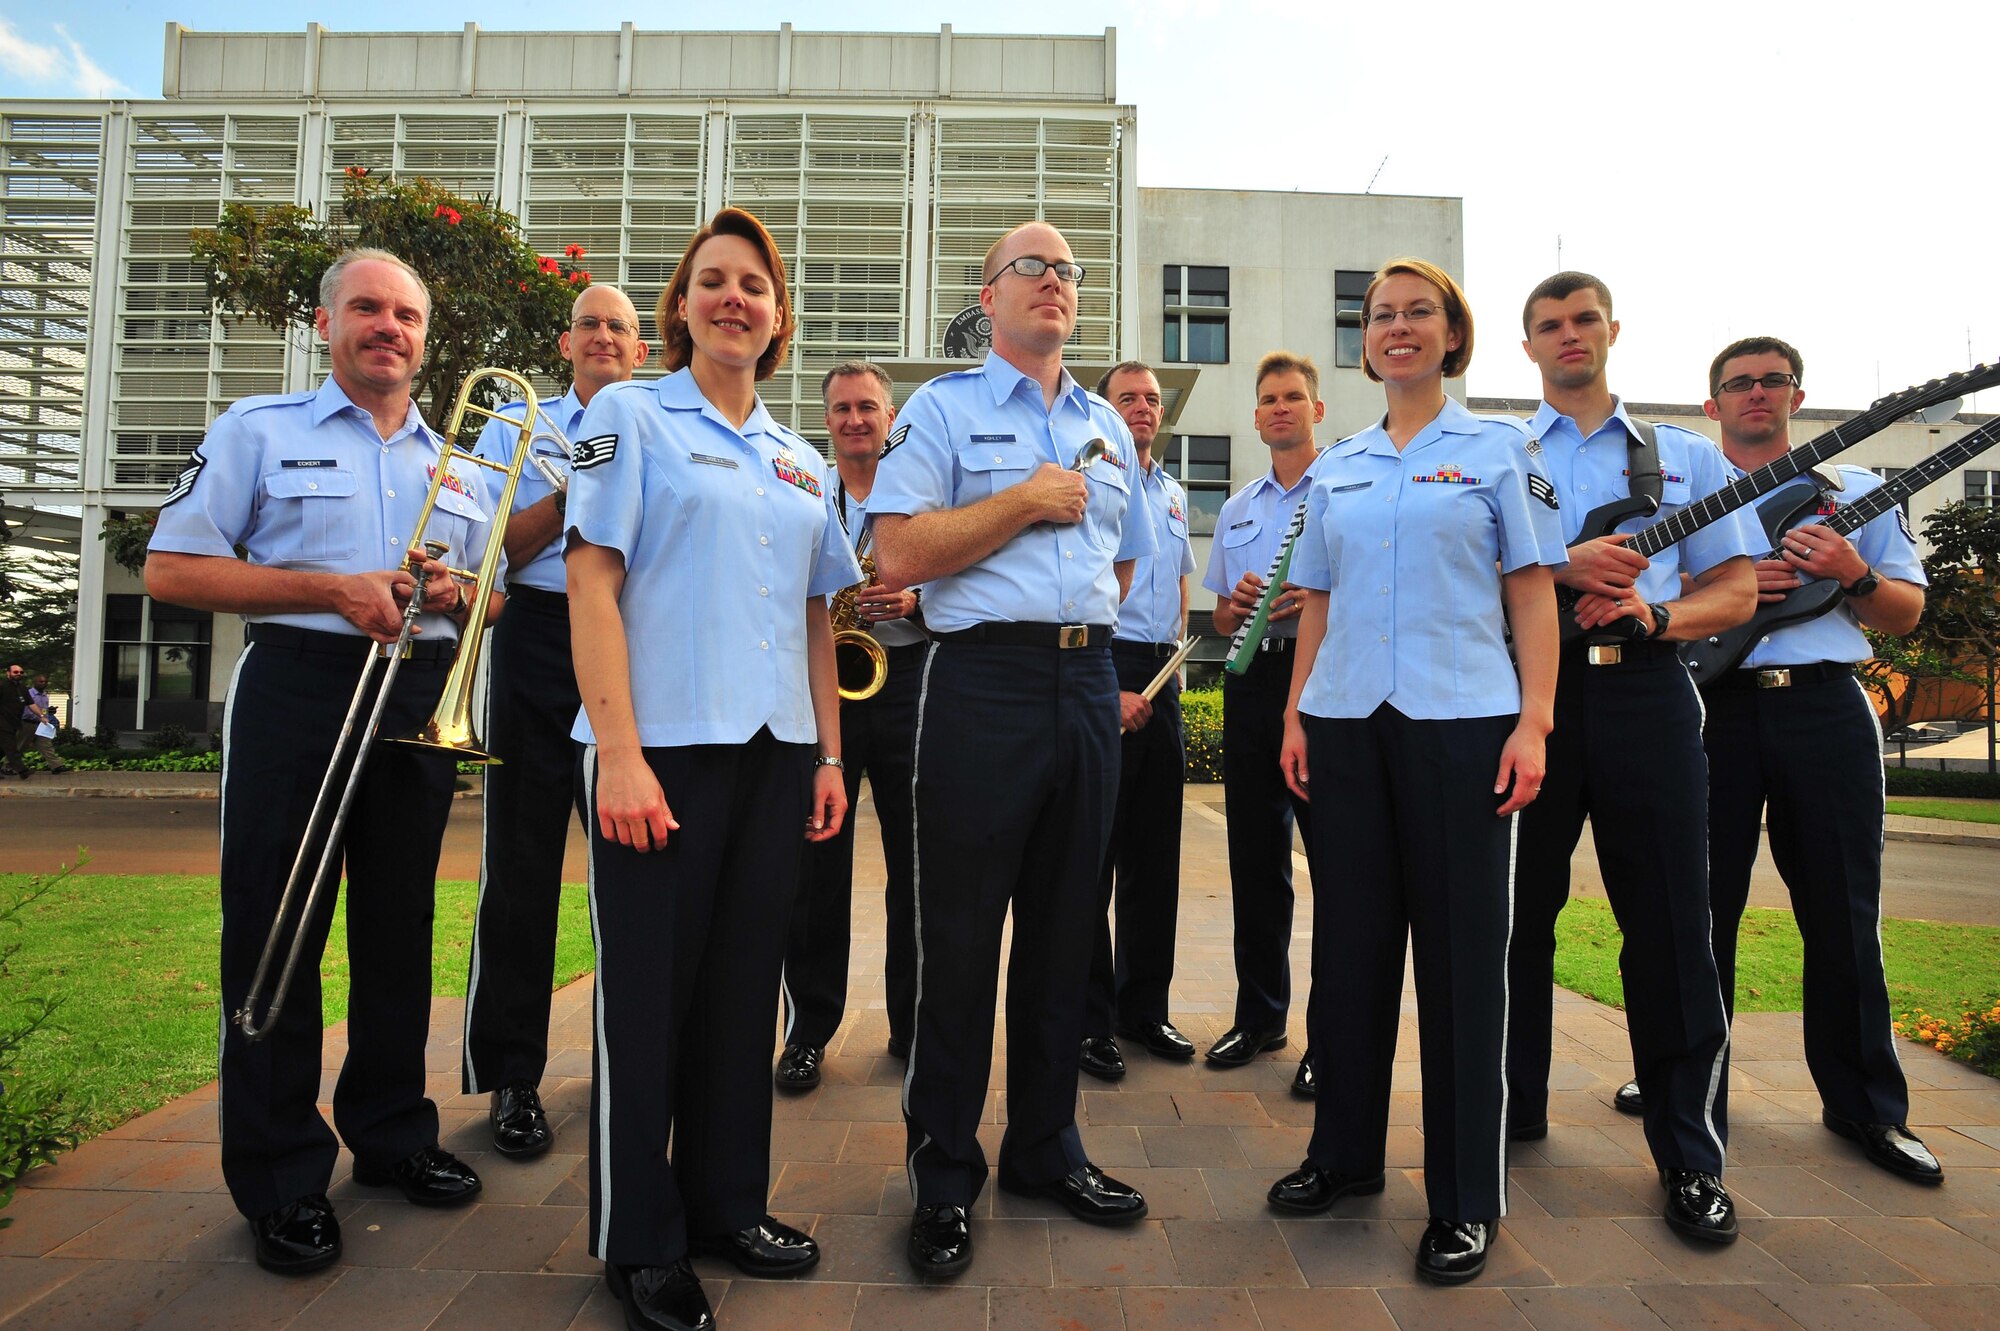 The United States Air Force Central Command Expeditionary Band visited Nairobi, Kenya for the first time November and played in different venues throughout the area.  They played for the U.S. ambassador and invited guests at his residence house. Other performances included civic centers and universities with crowds exceeding 1,800 people.(U.S. Navy Photo/Petty Officer 1st Class Scott Cohen)(Released)